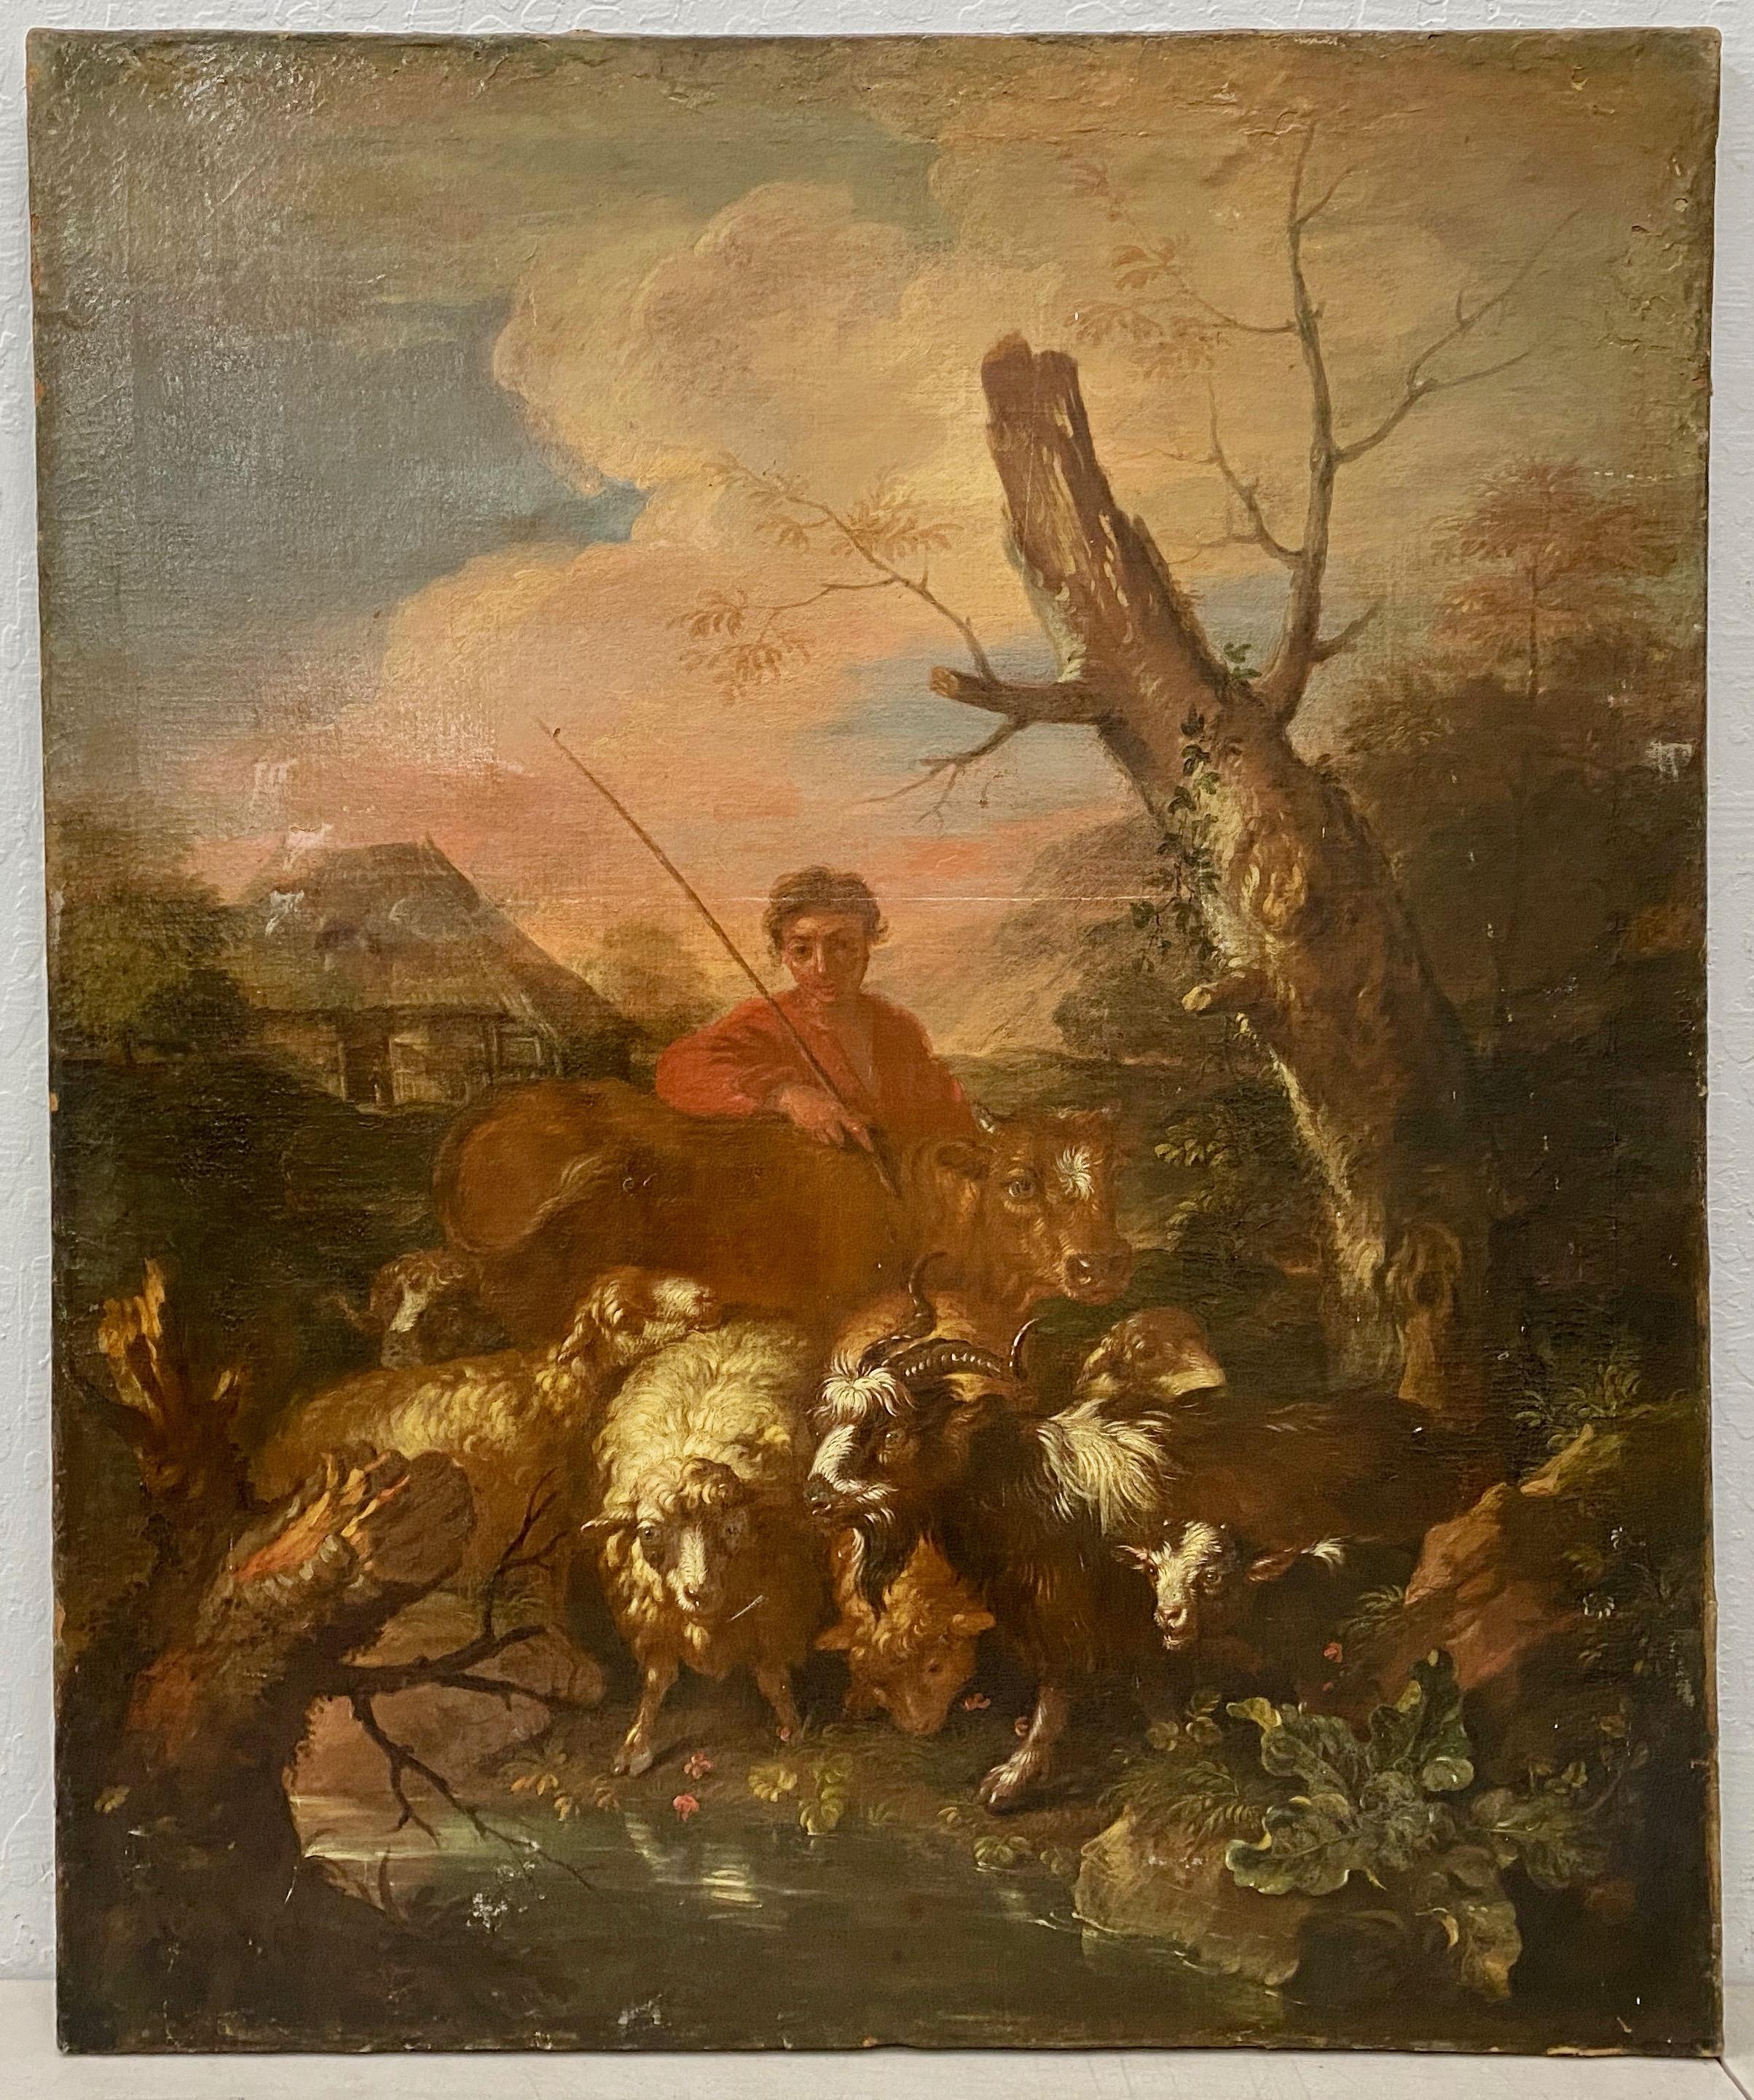 Unknown Landscape Painting - 18th to 19th Century Old Master Painting W/ Shepherd & His Flock